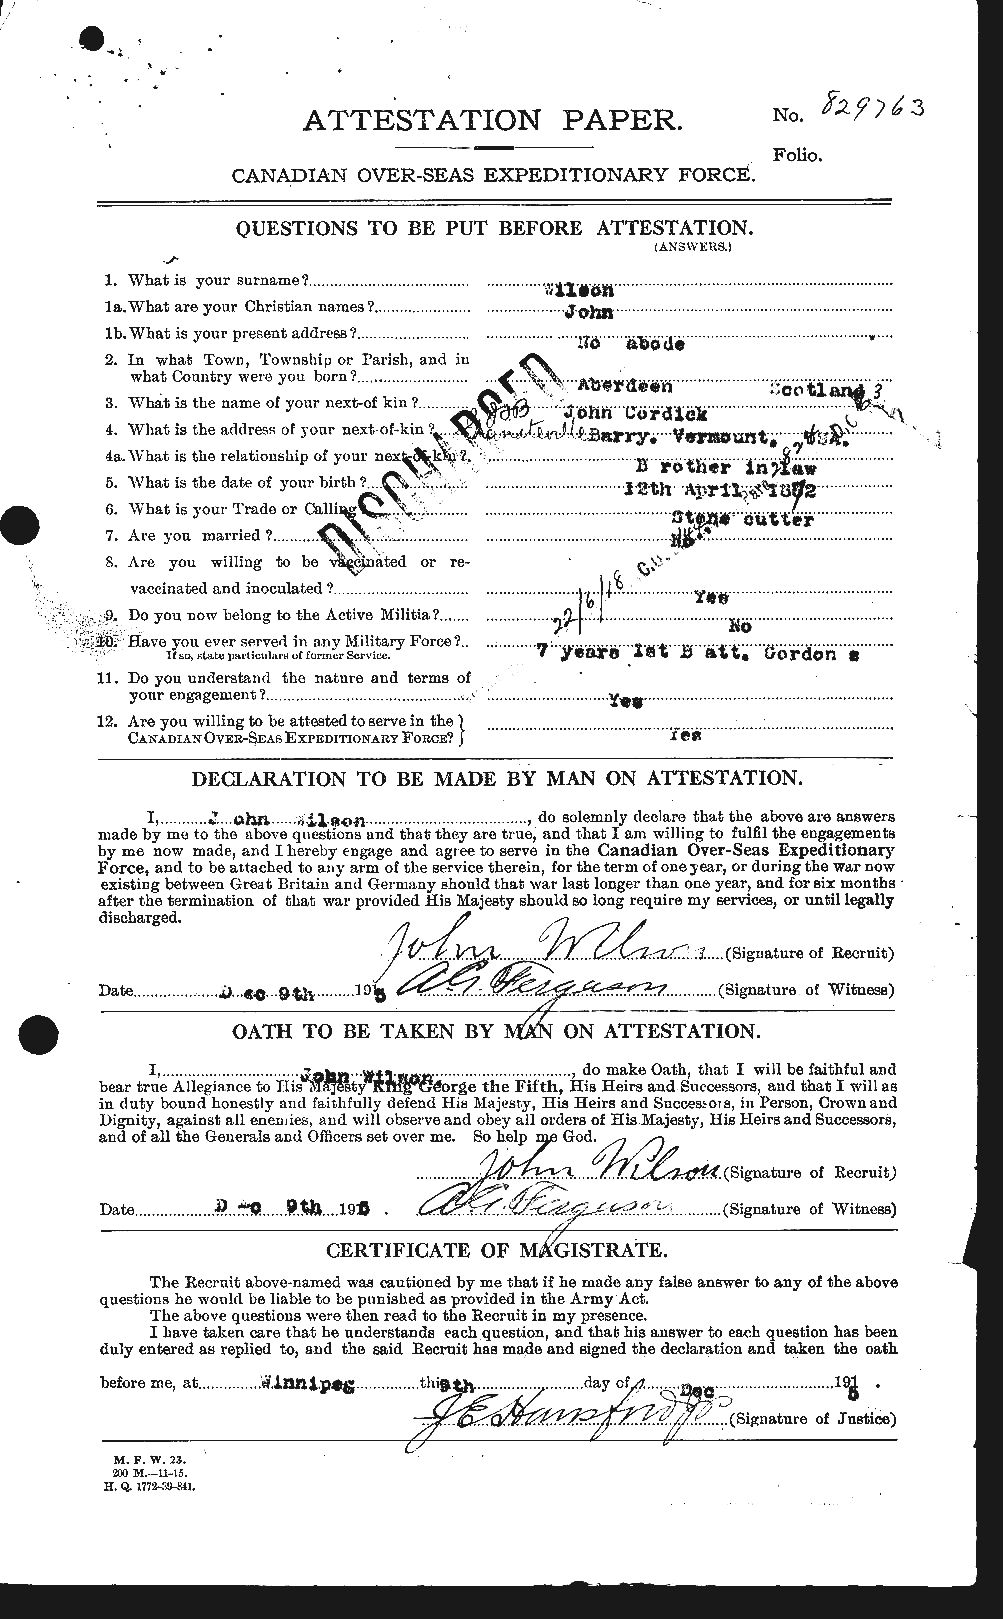 Personnel Records of the First World War - CEF 681607a